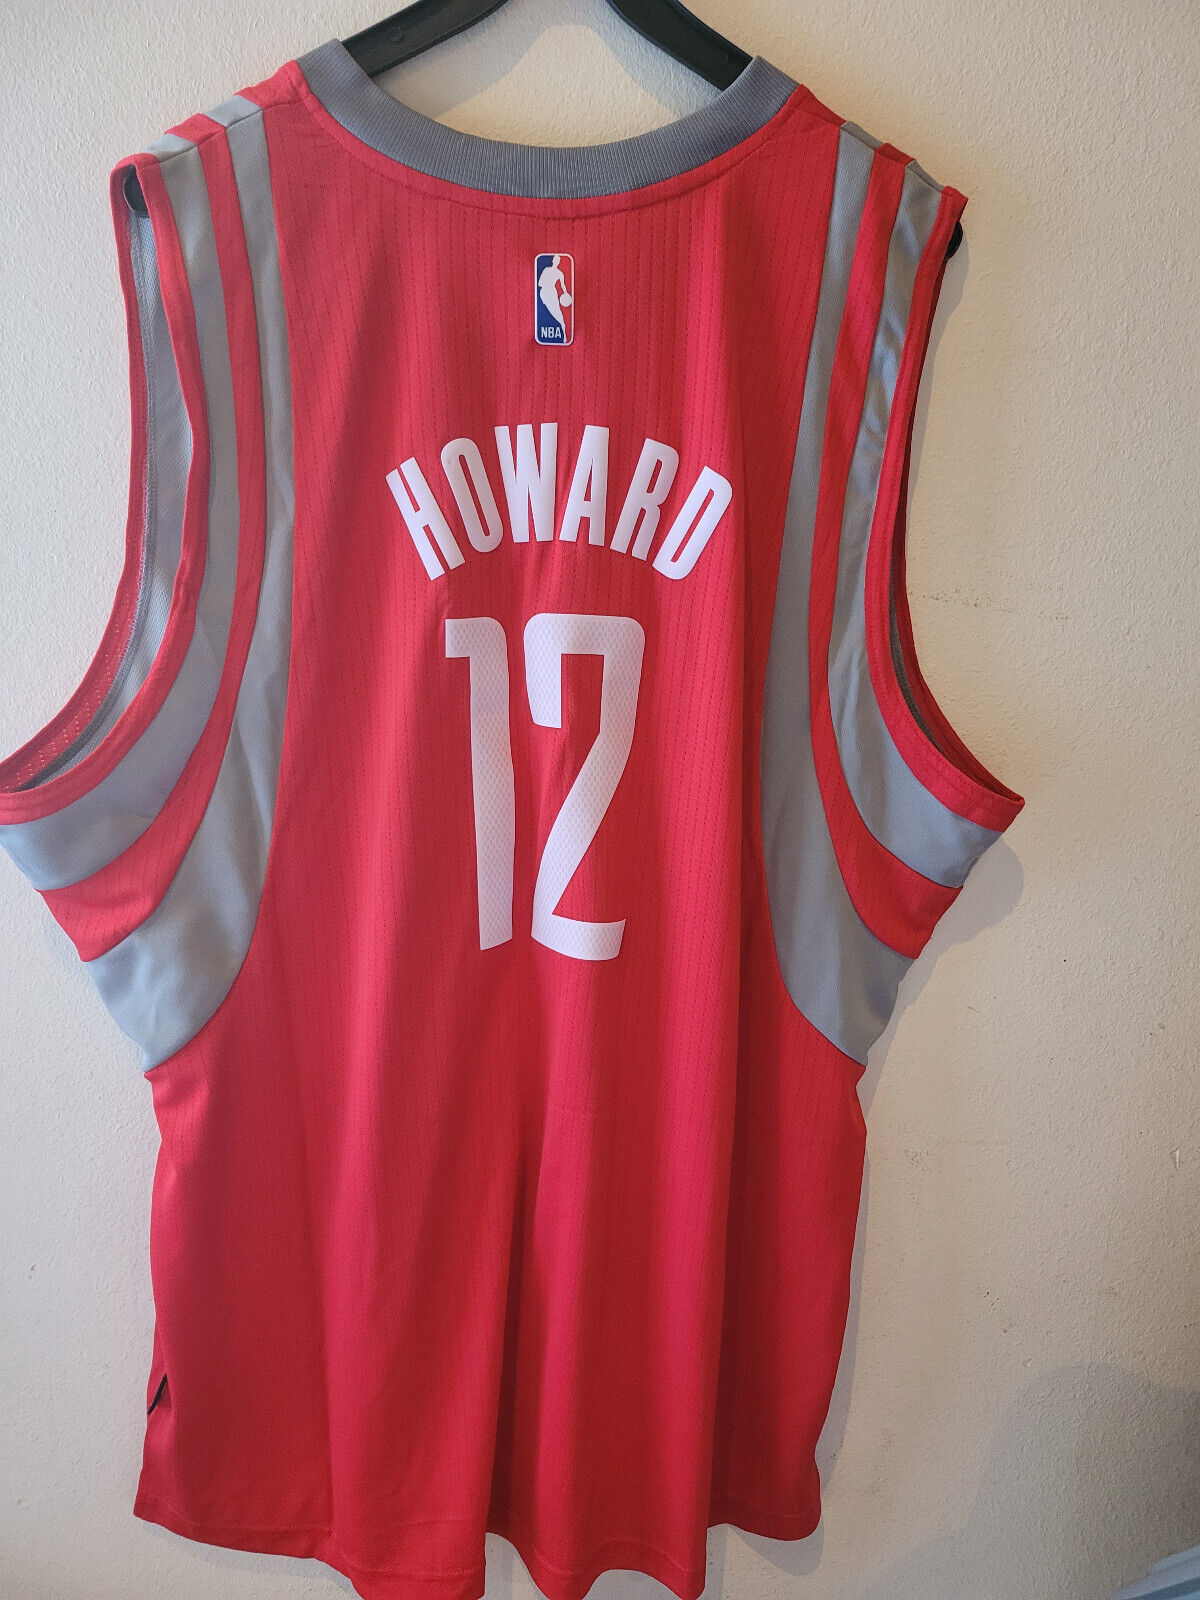 Primary image for ADIDAS SWINGMAN JERSEY HOUSTON ROCKETS DWIGHT HOWARD RED SIZE 2XL